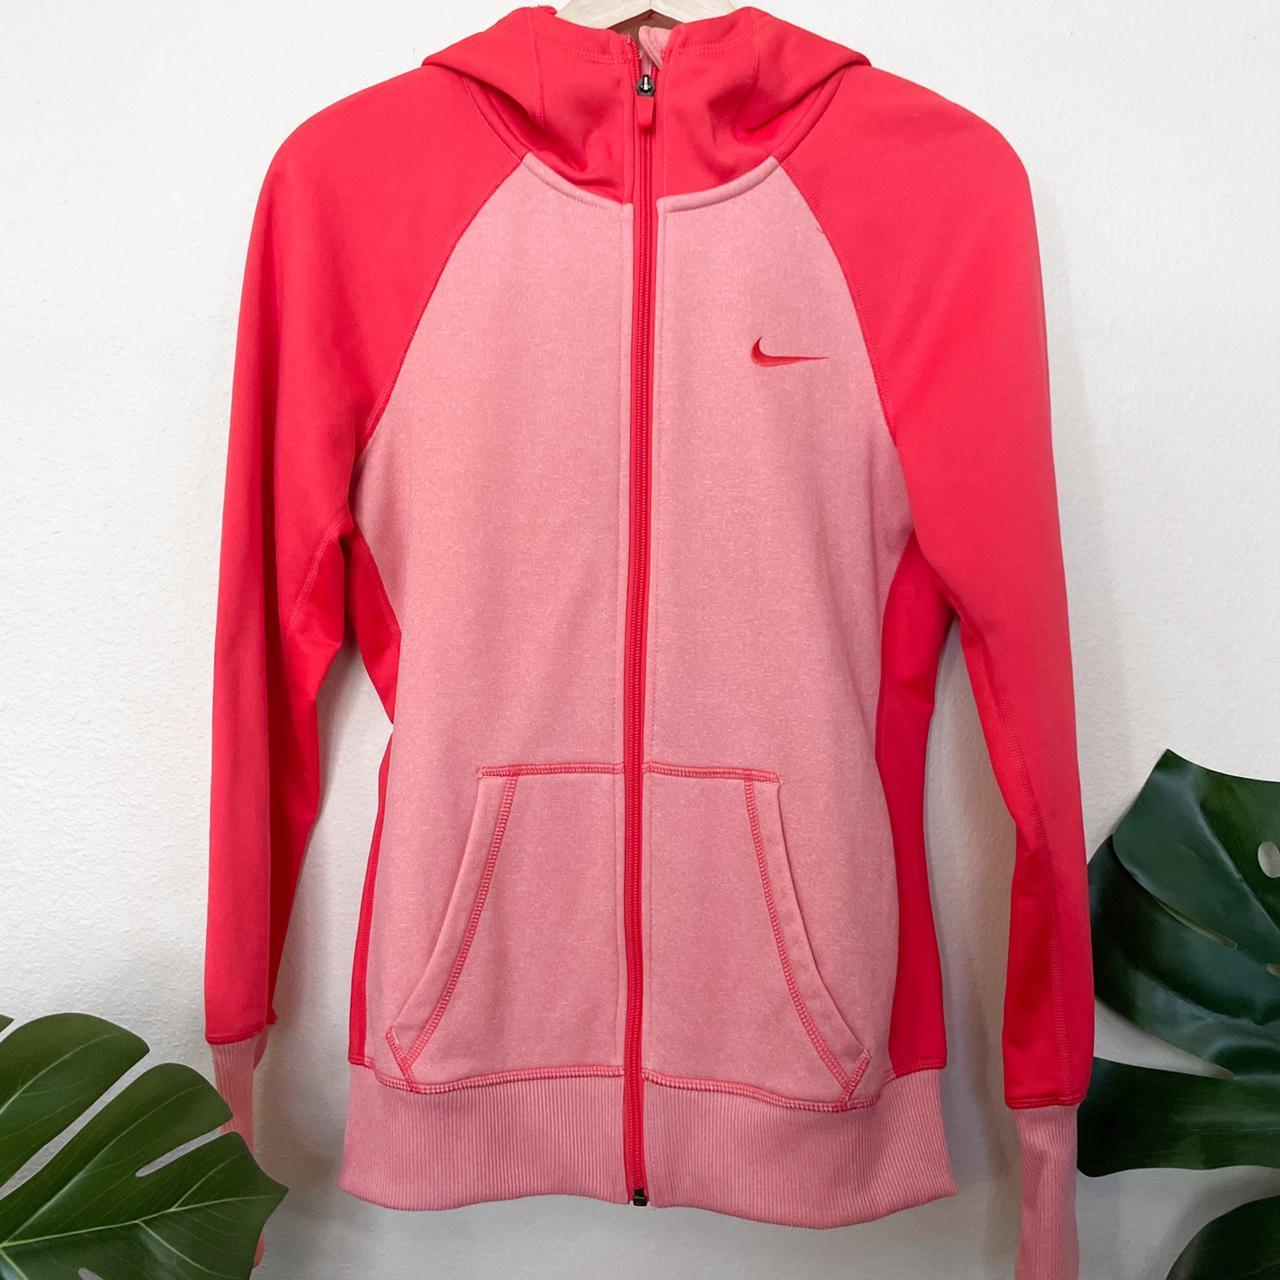 Women's Pink and Red Jacket